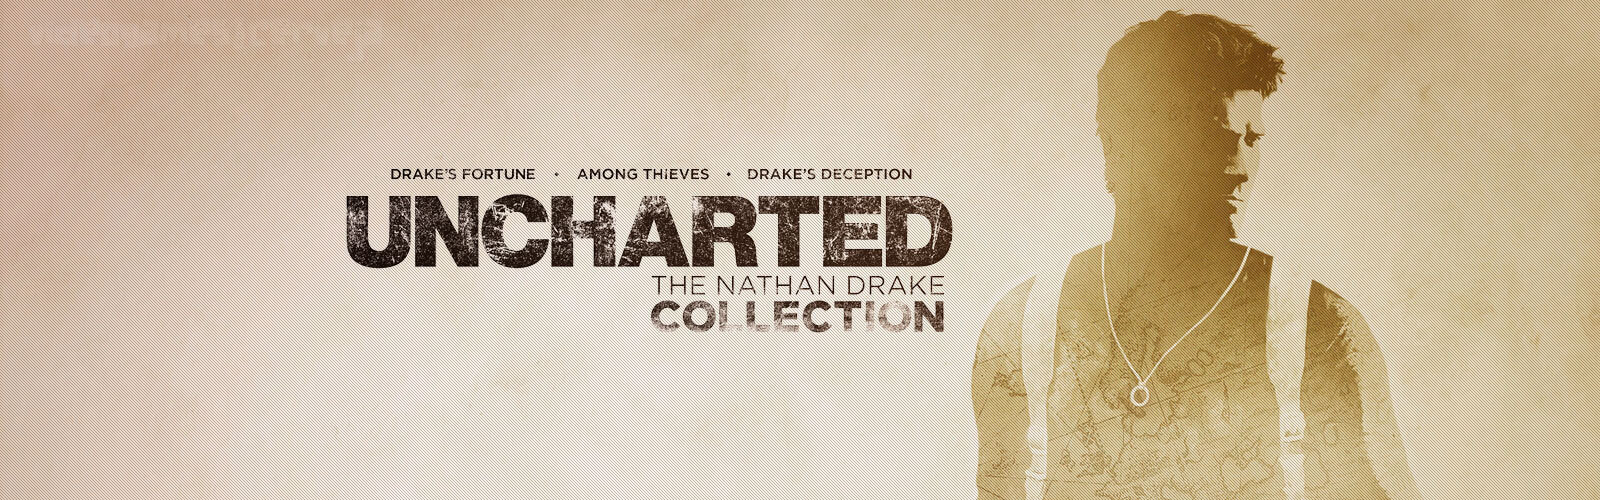 Análise - Uncharted: The Nathan Drake Collection (PS4) Cover